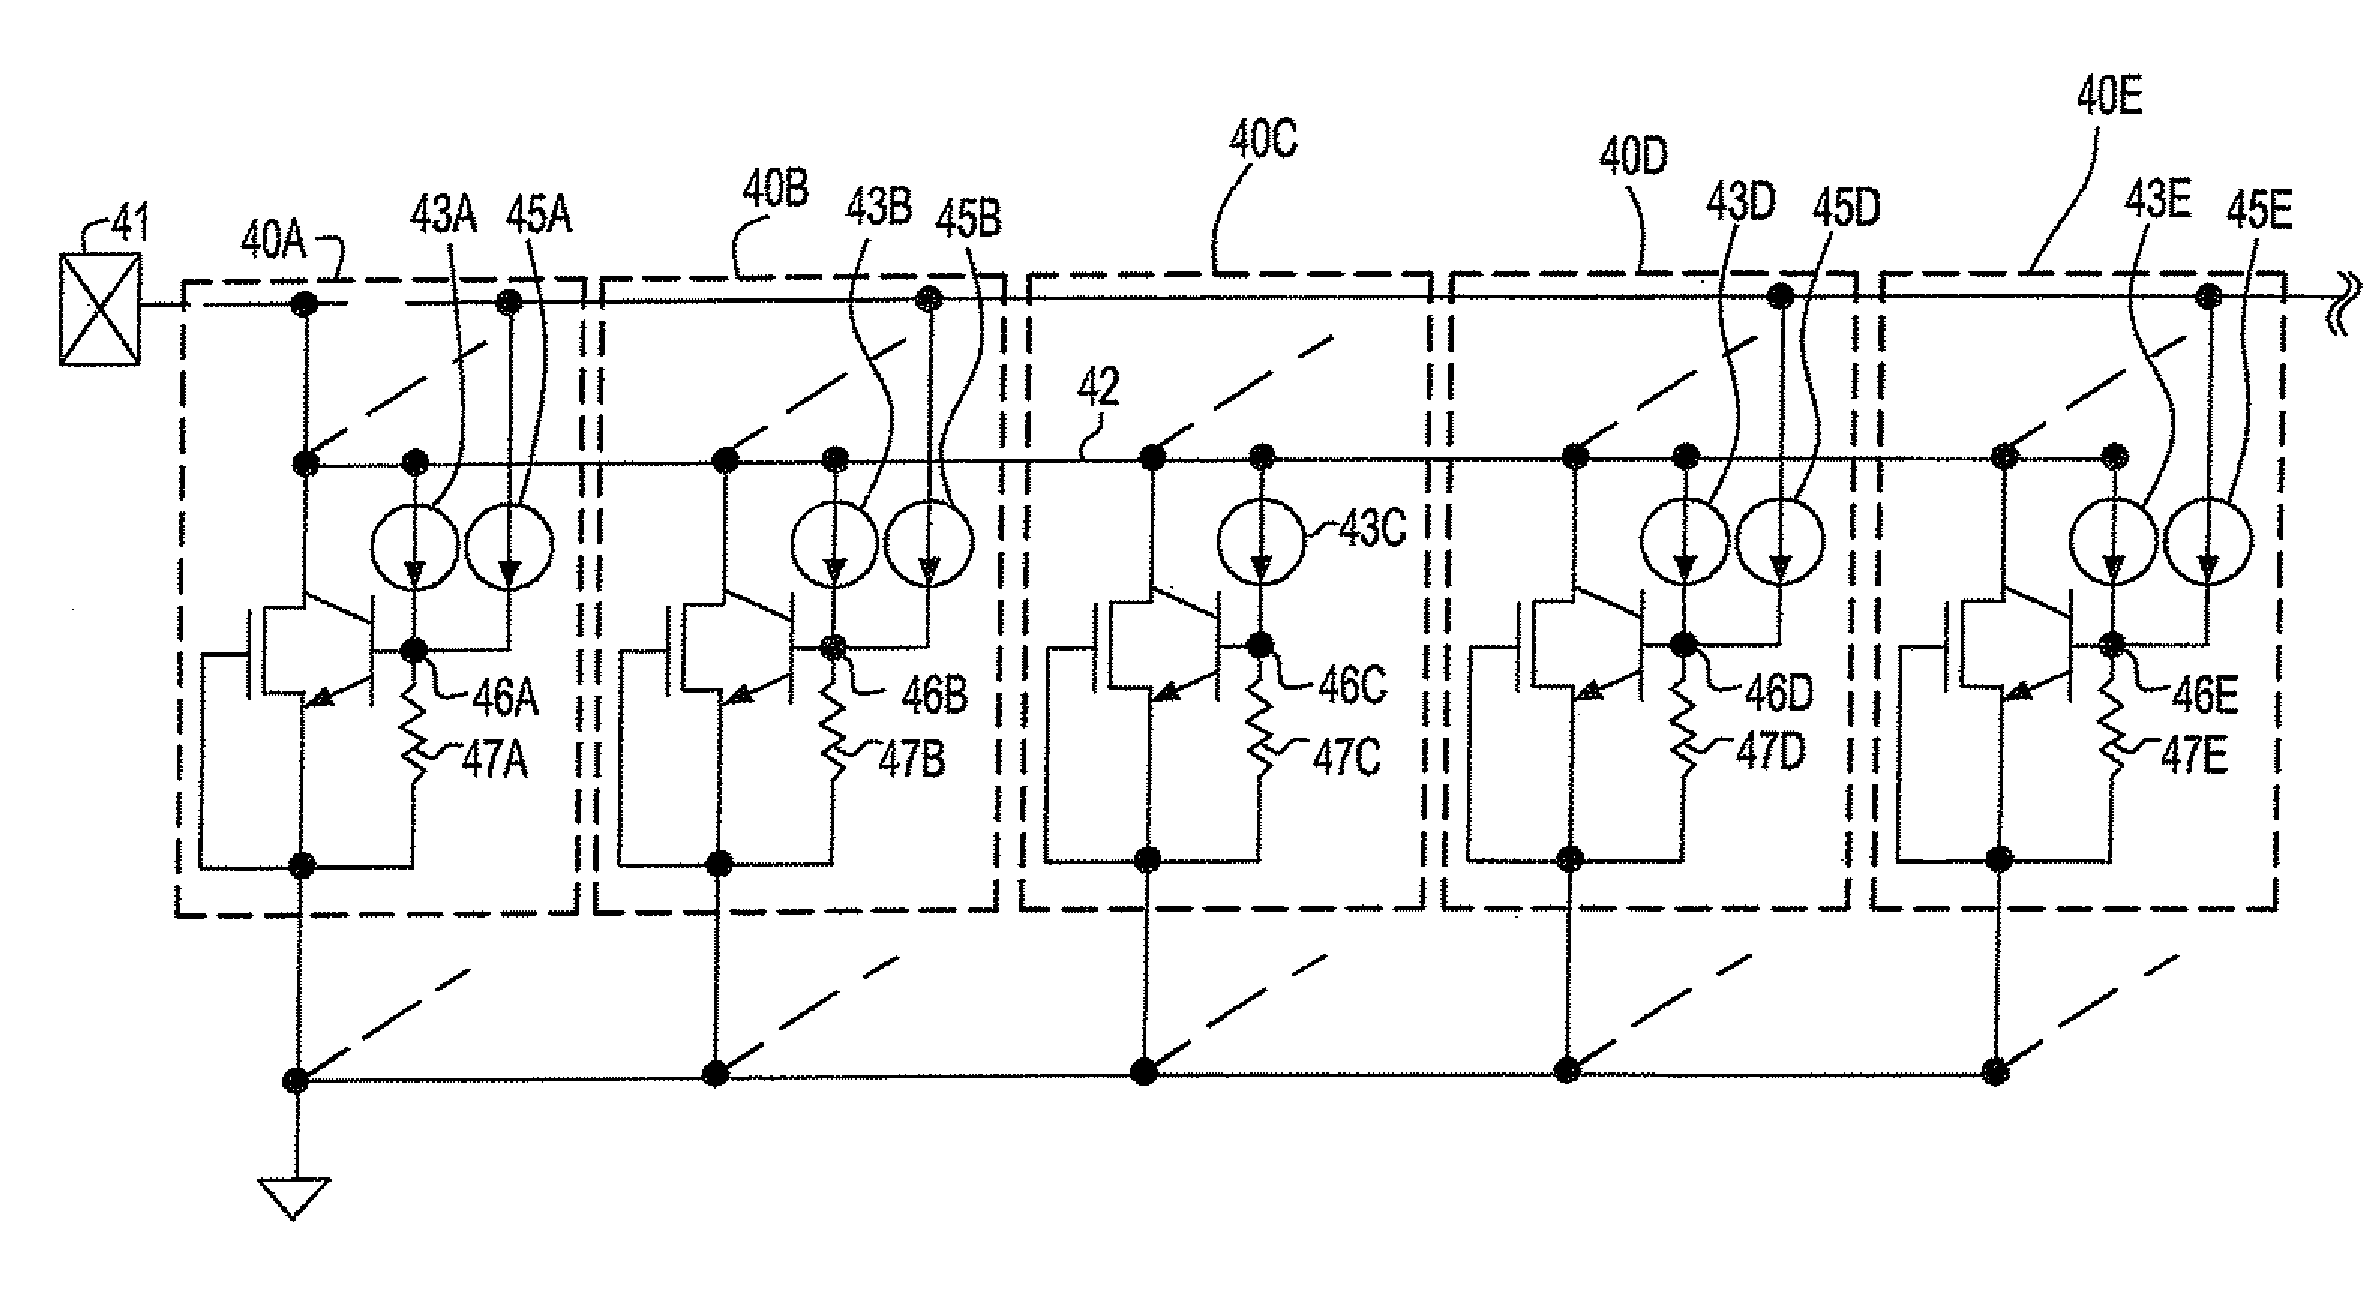 Design structure for uniform triggering of multifinger semiconductor devices with tunable trigger voltage